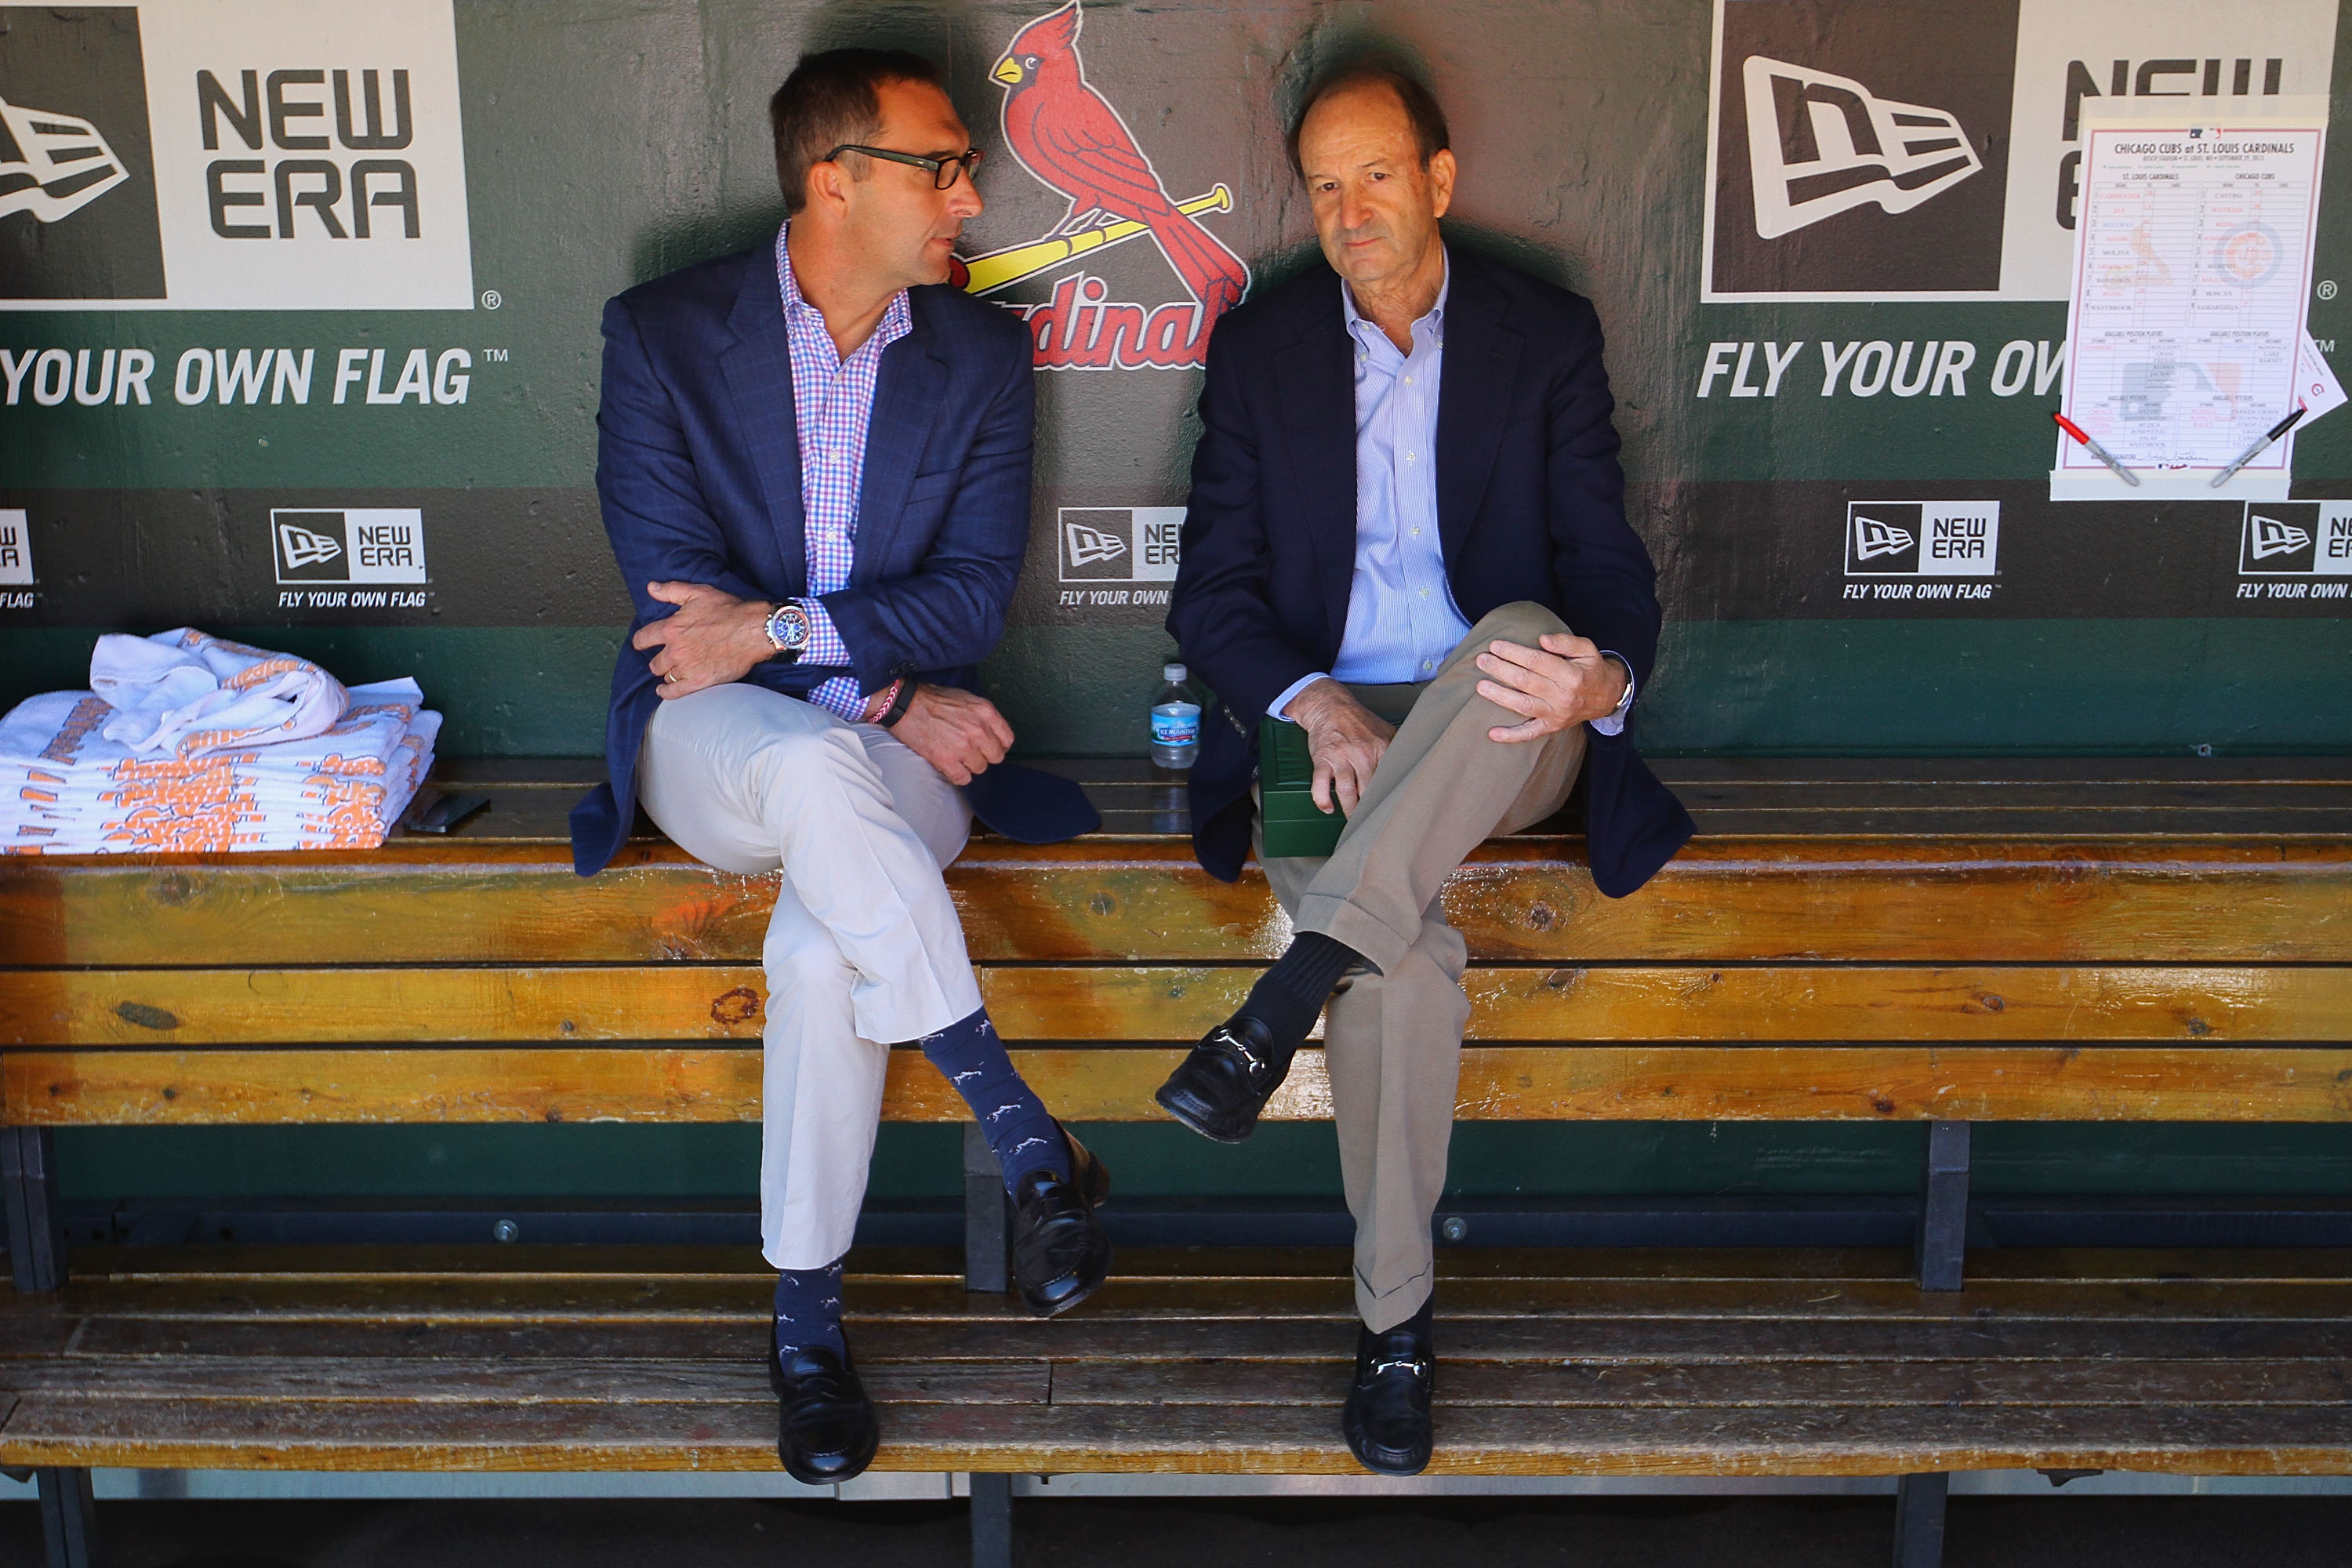 St. Louis Cardinals general manager John Mozeliak, left, and Bill DeWitt, Jr., the Cardinals managing partner and chairman, talk in the dugout prior to a game against the Chicago Cubs at Busch Stadium on September 29, 2013. (Getty)